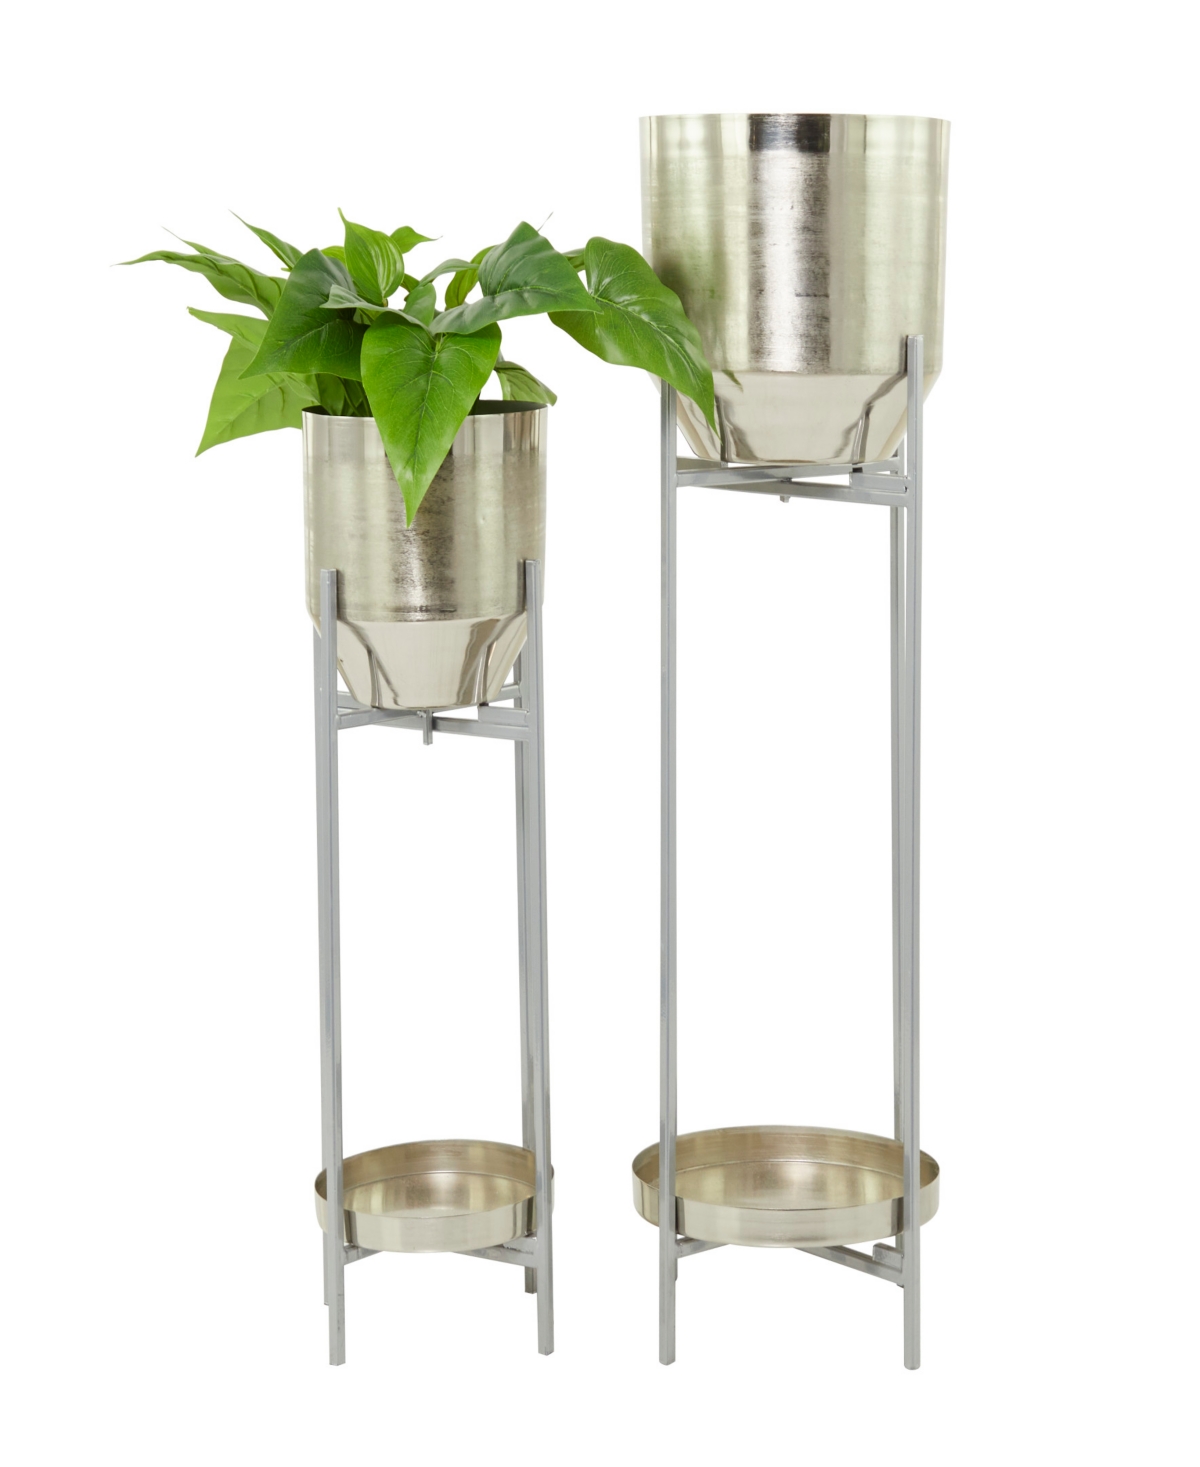 Silver-Tone Metal Planter with Removable Stand Set of 2 - Silver